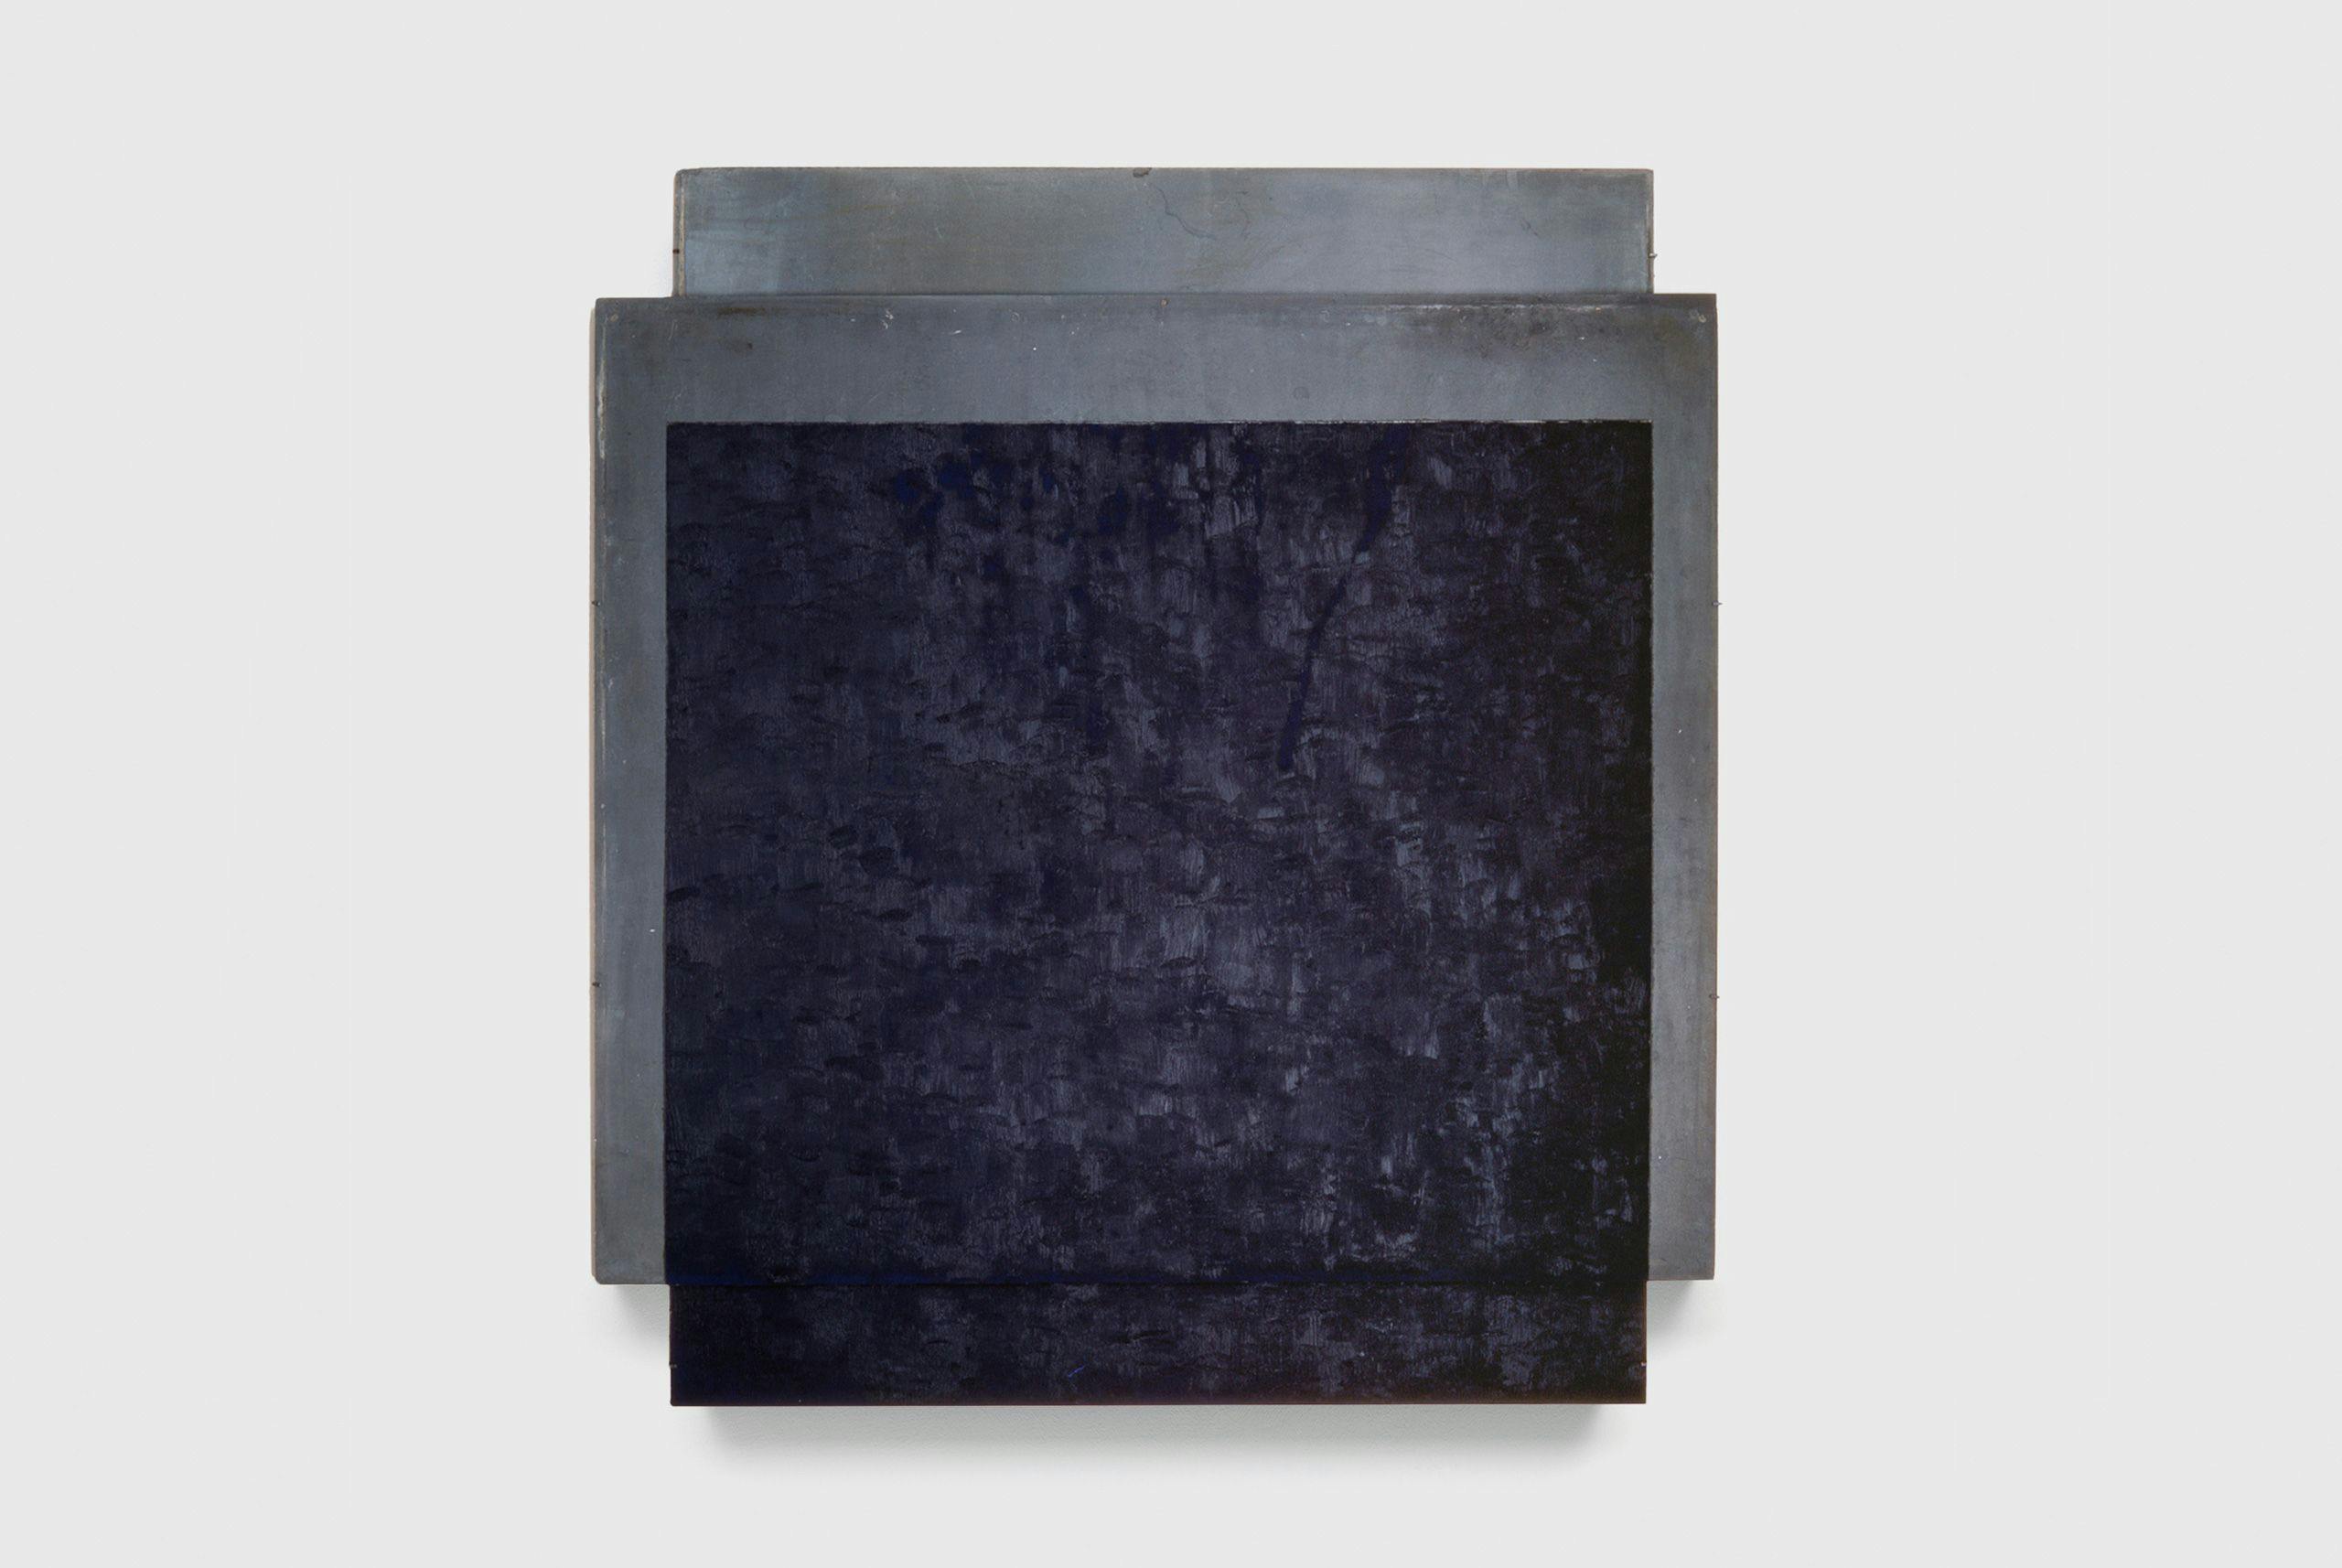 An oil on slate artwork by Merrill Wagner titled Bayonne, dated 1988